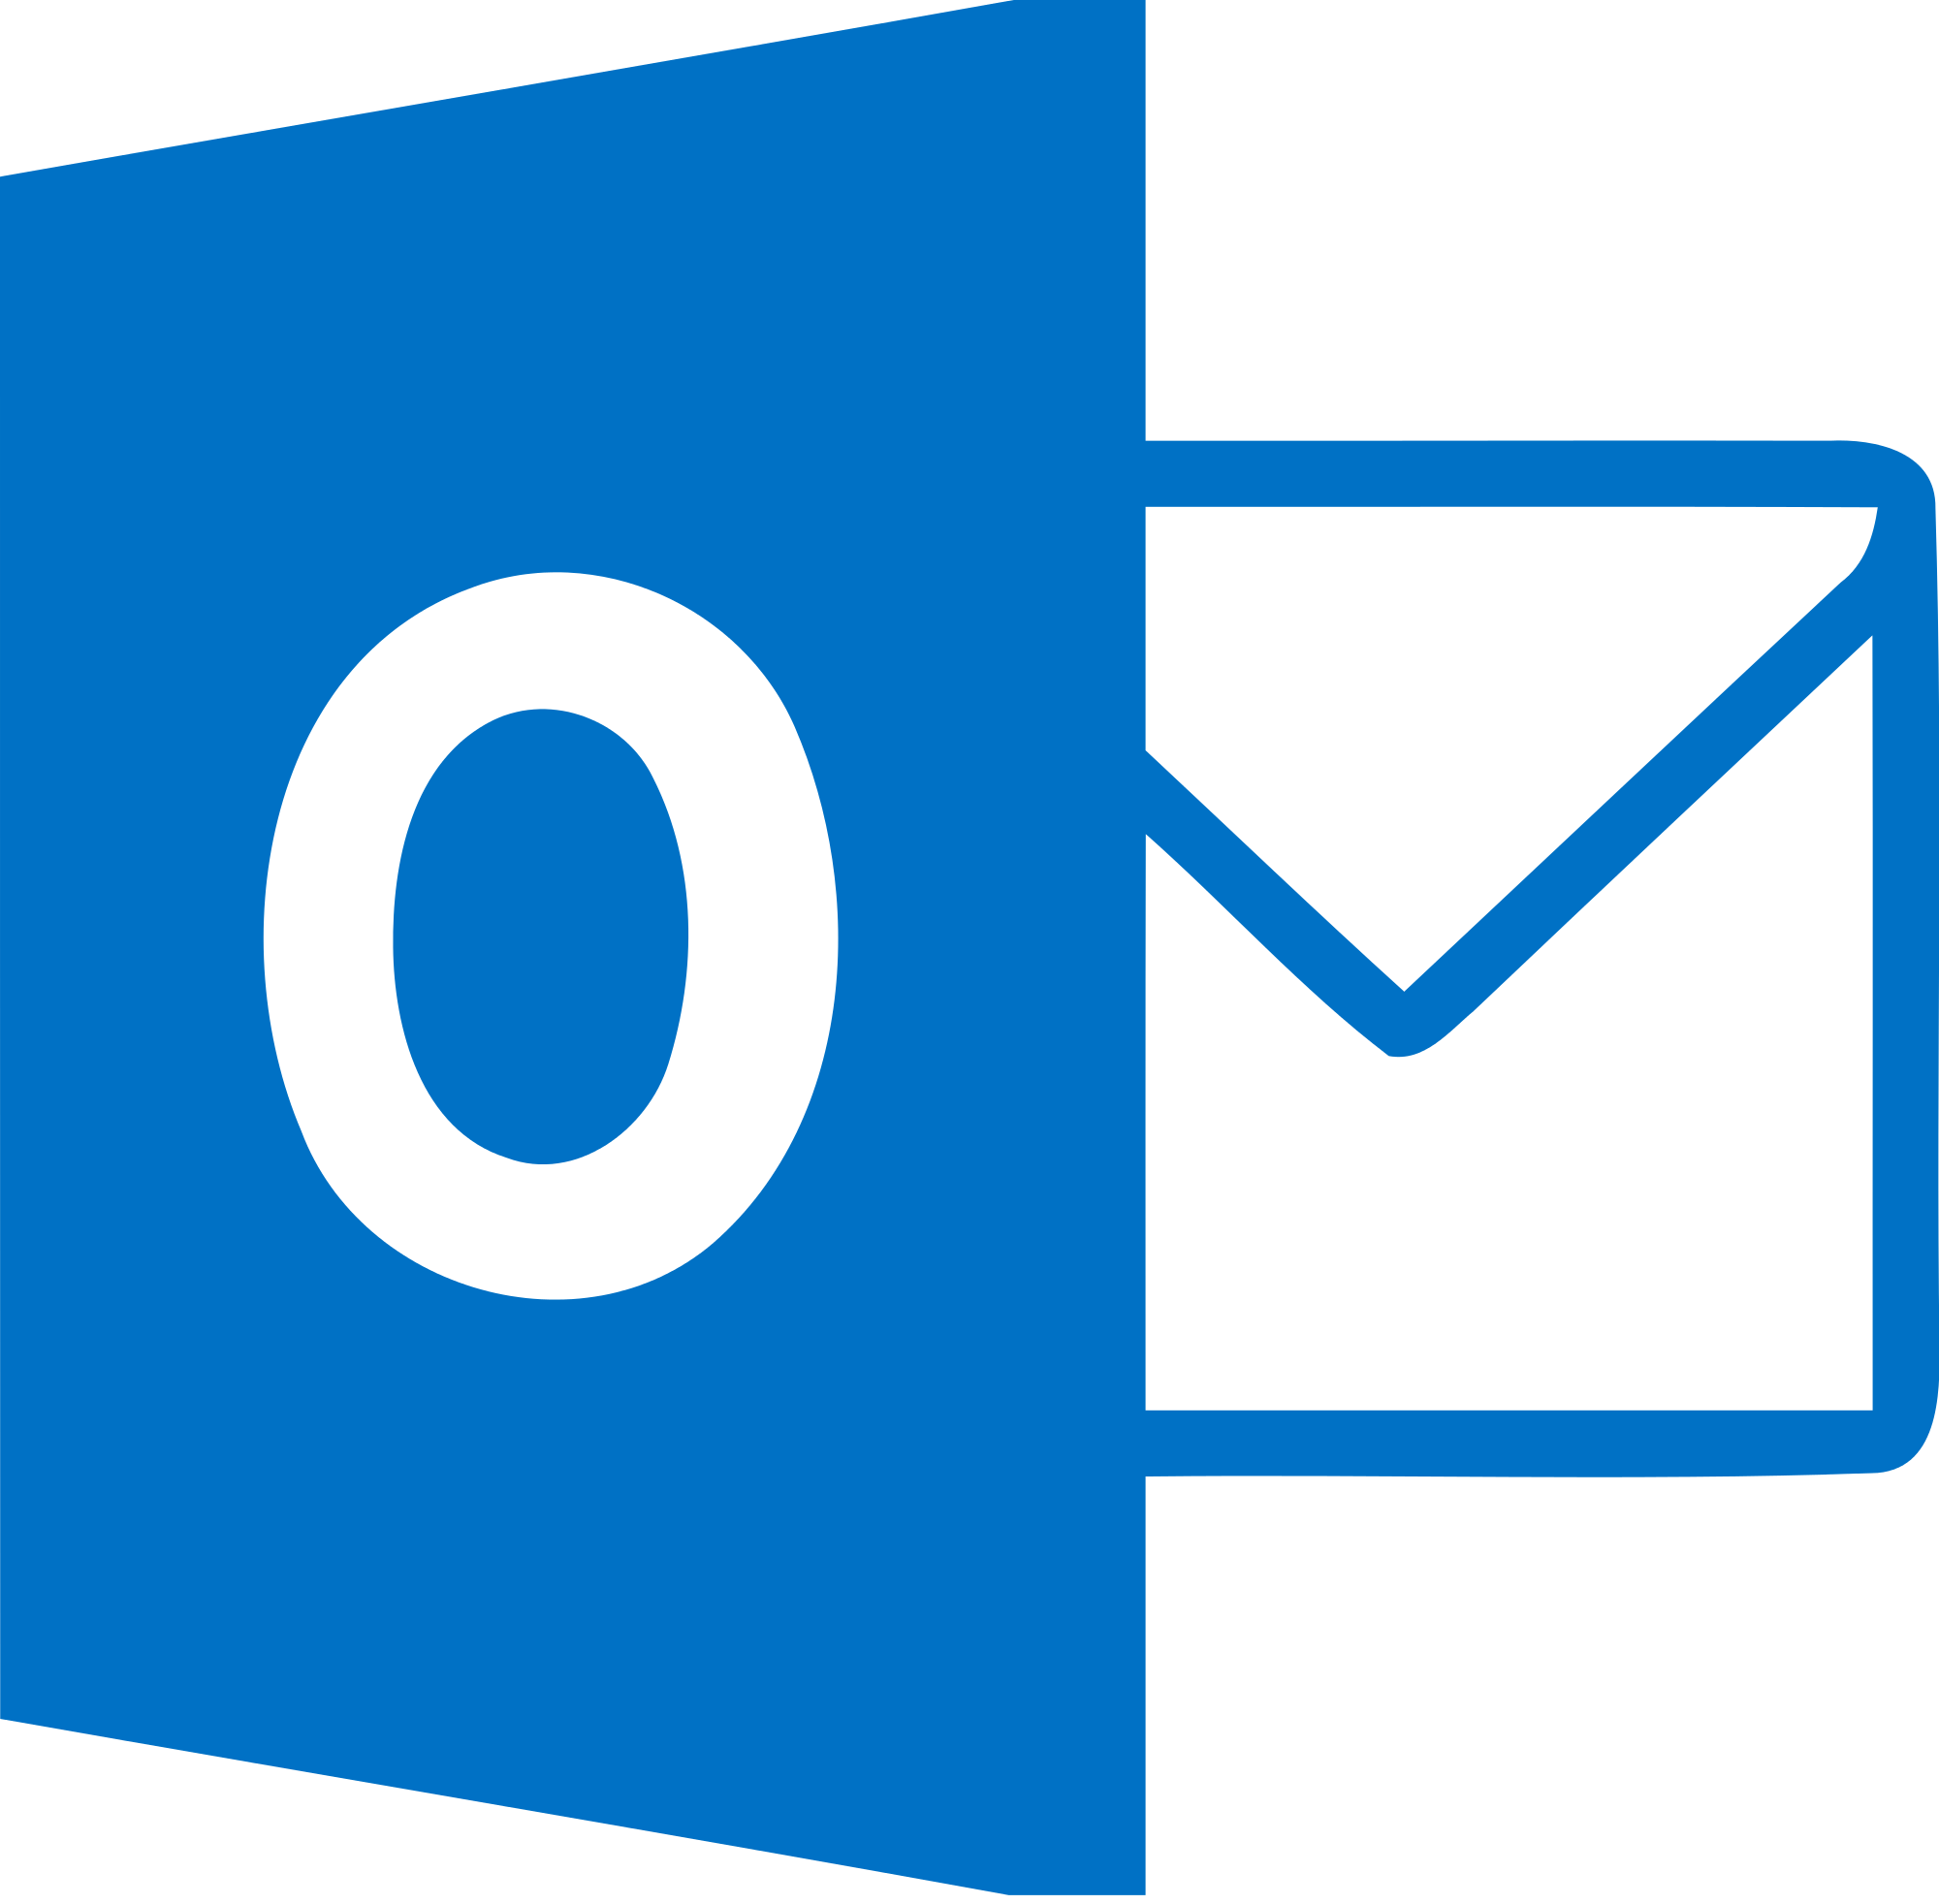 the logo of outlook email service